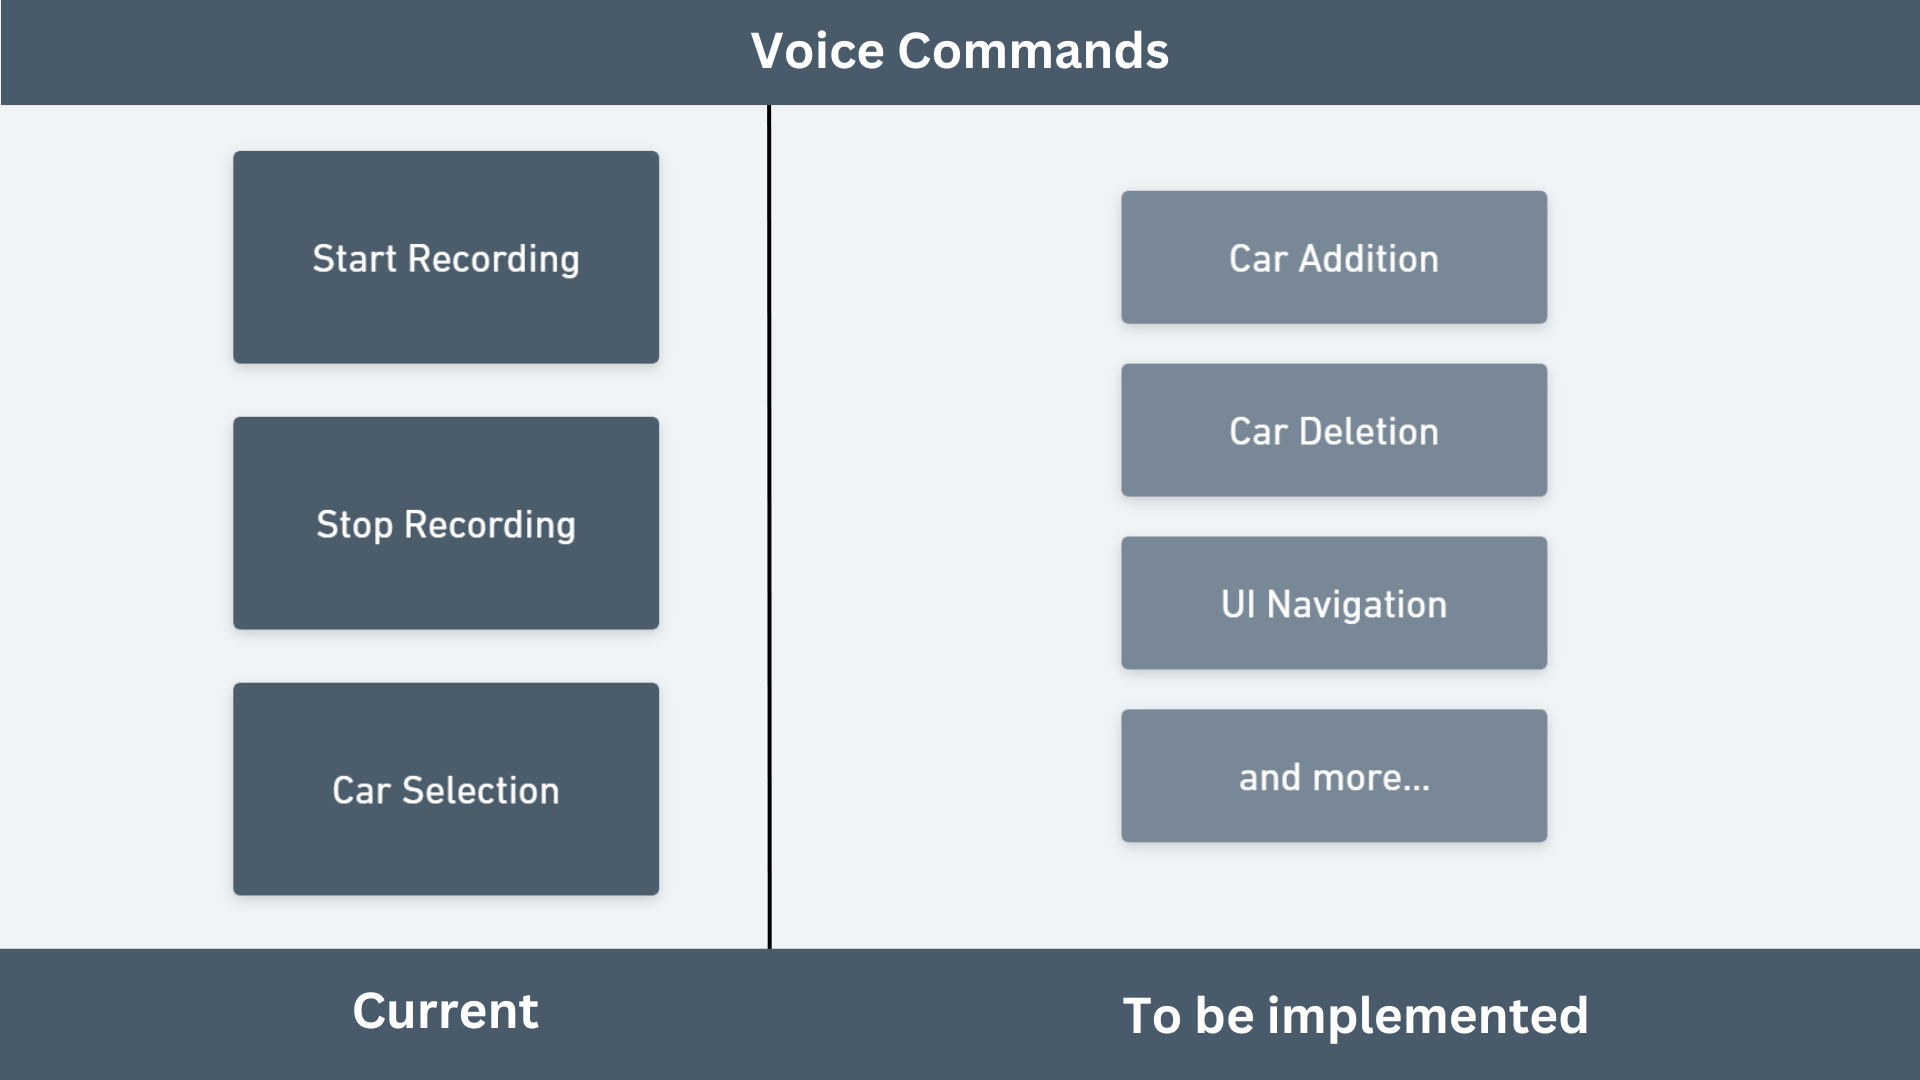 A representation of current and future voice commands.